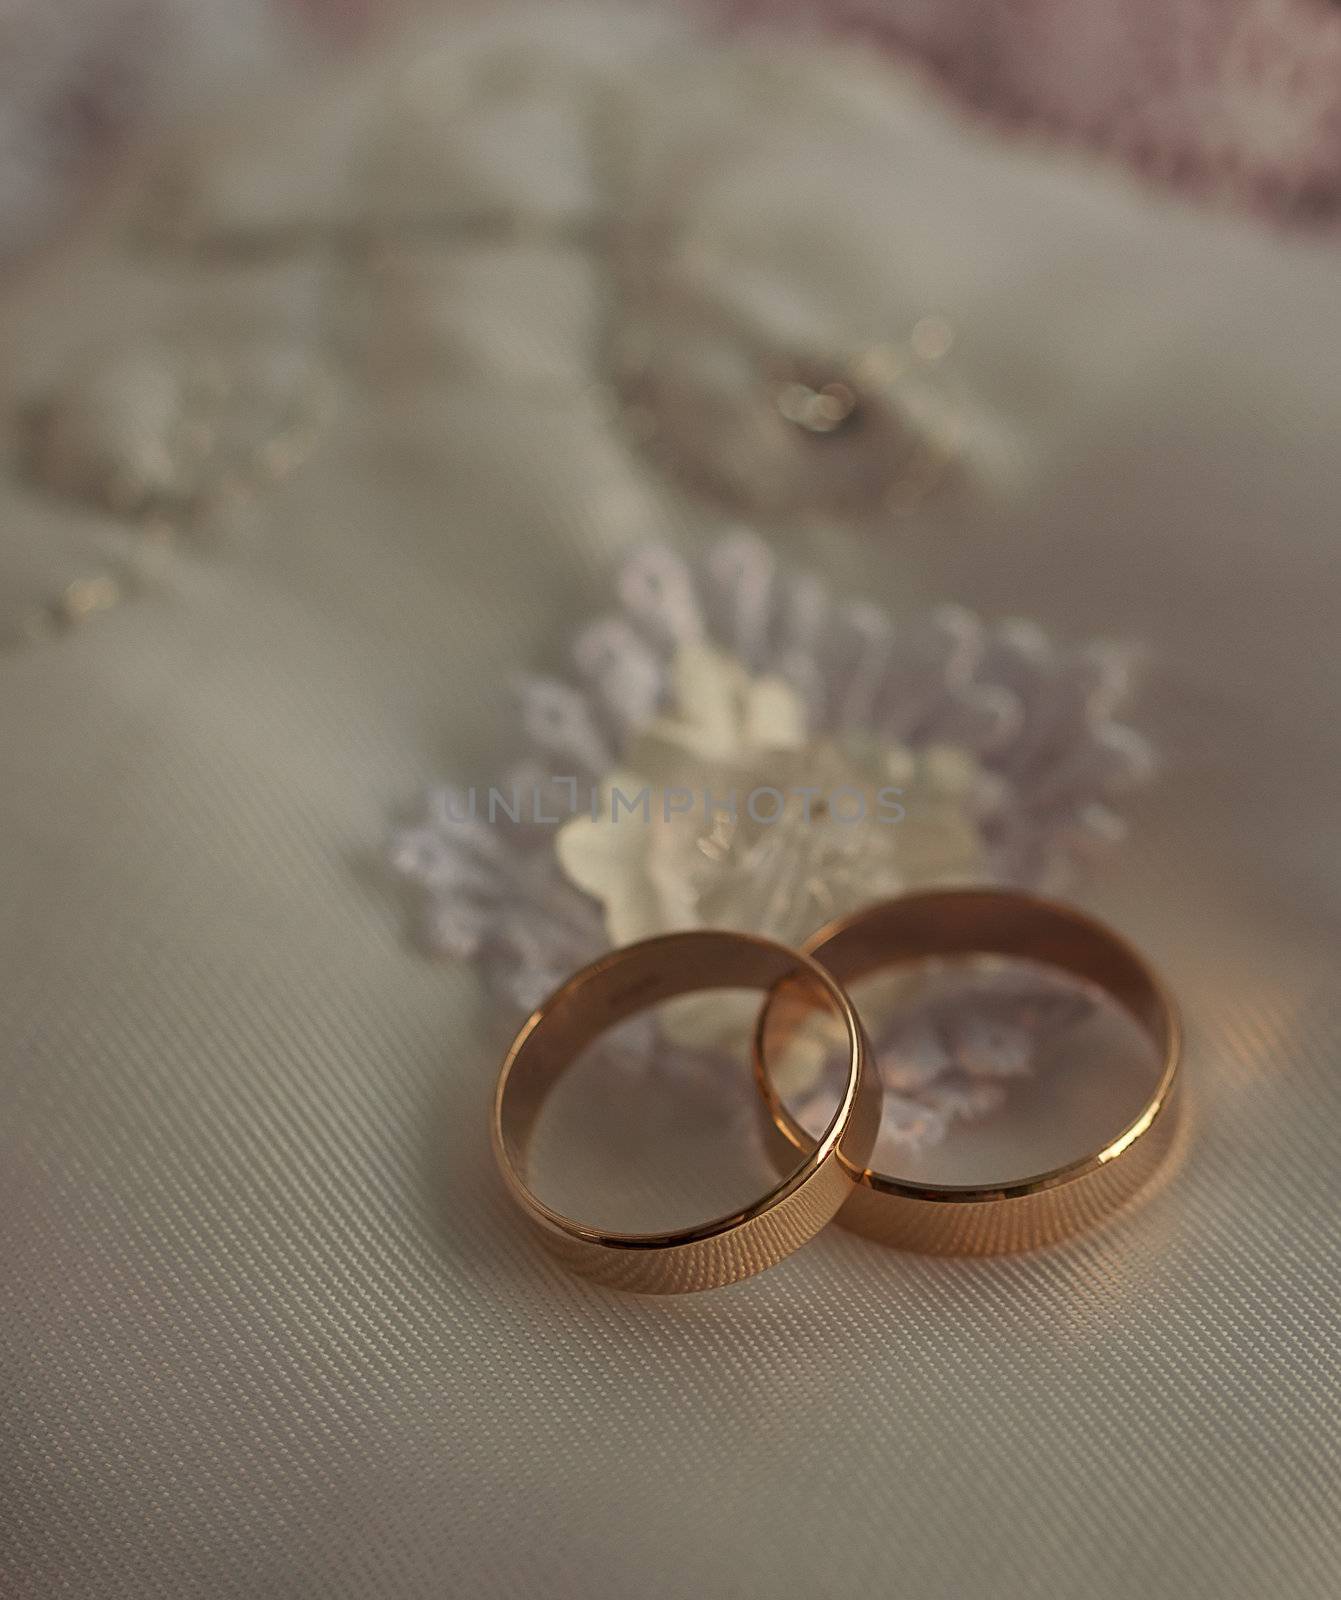 Two wedding rings by victosha